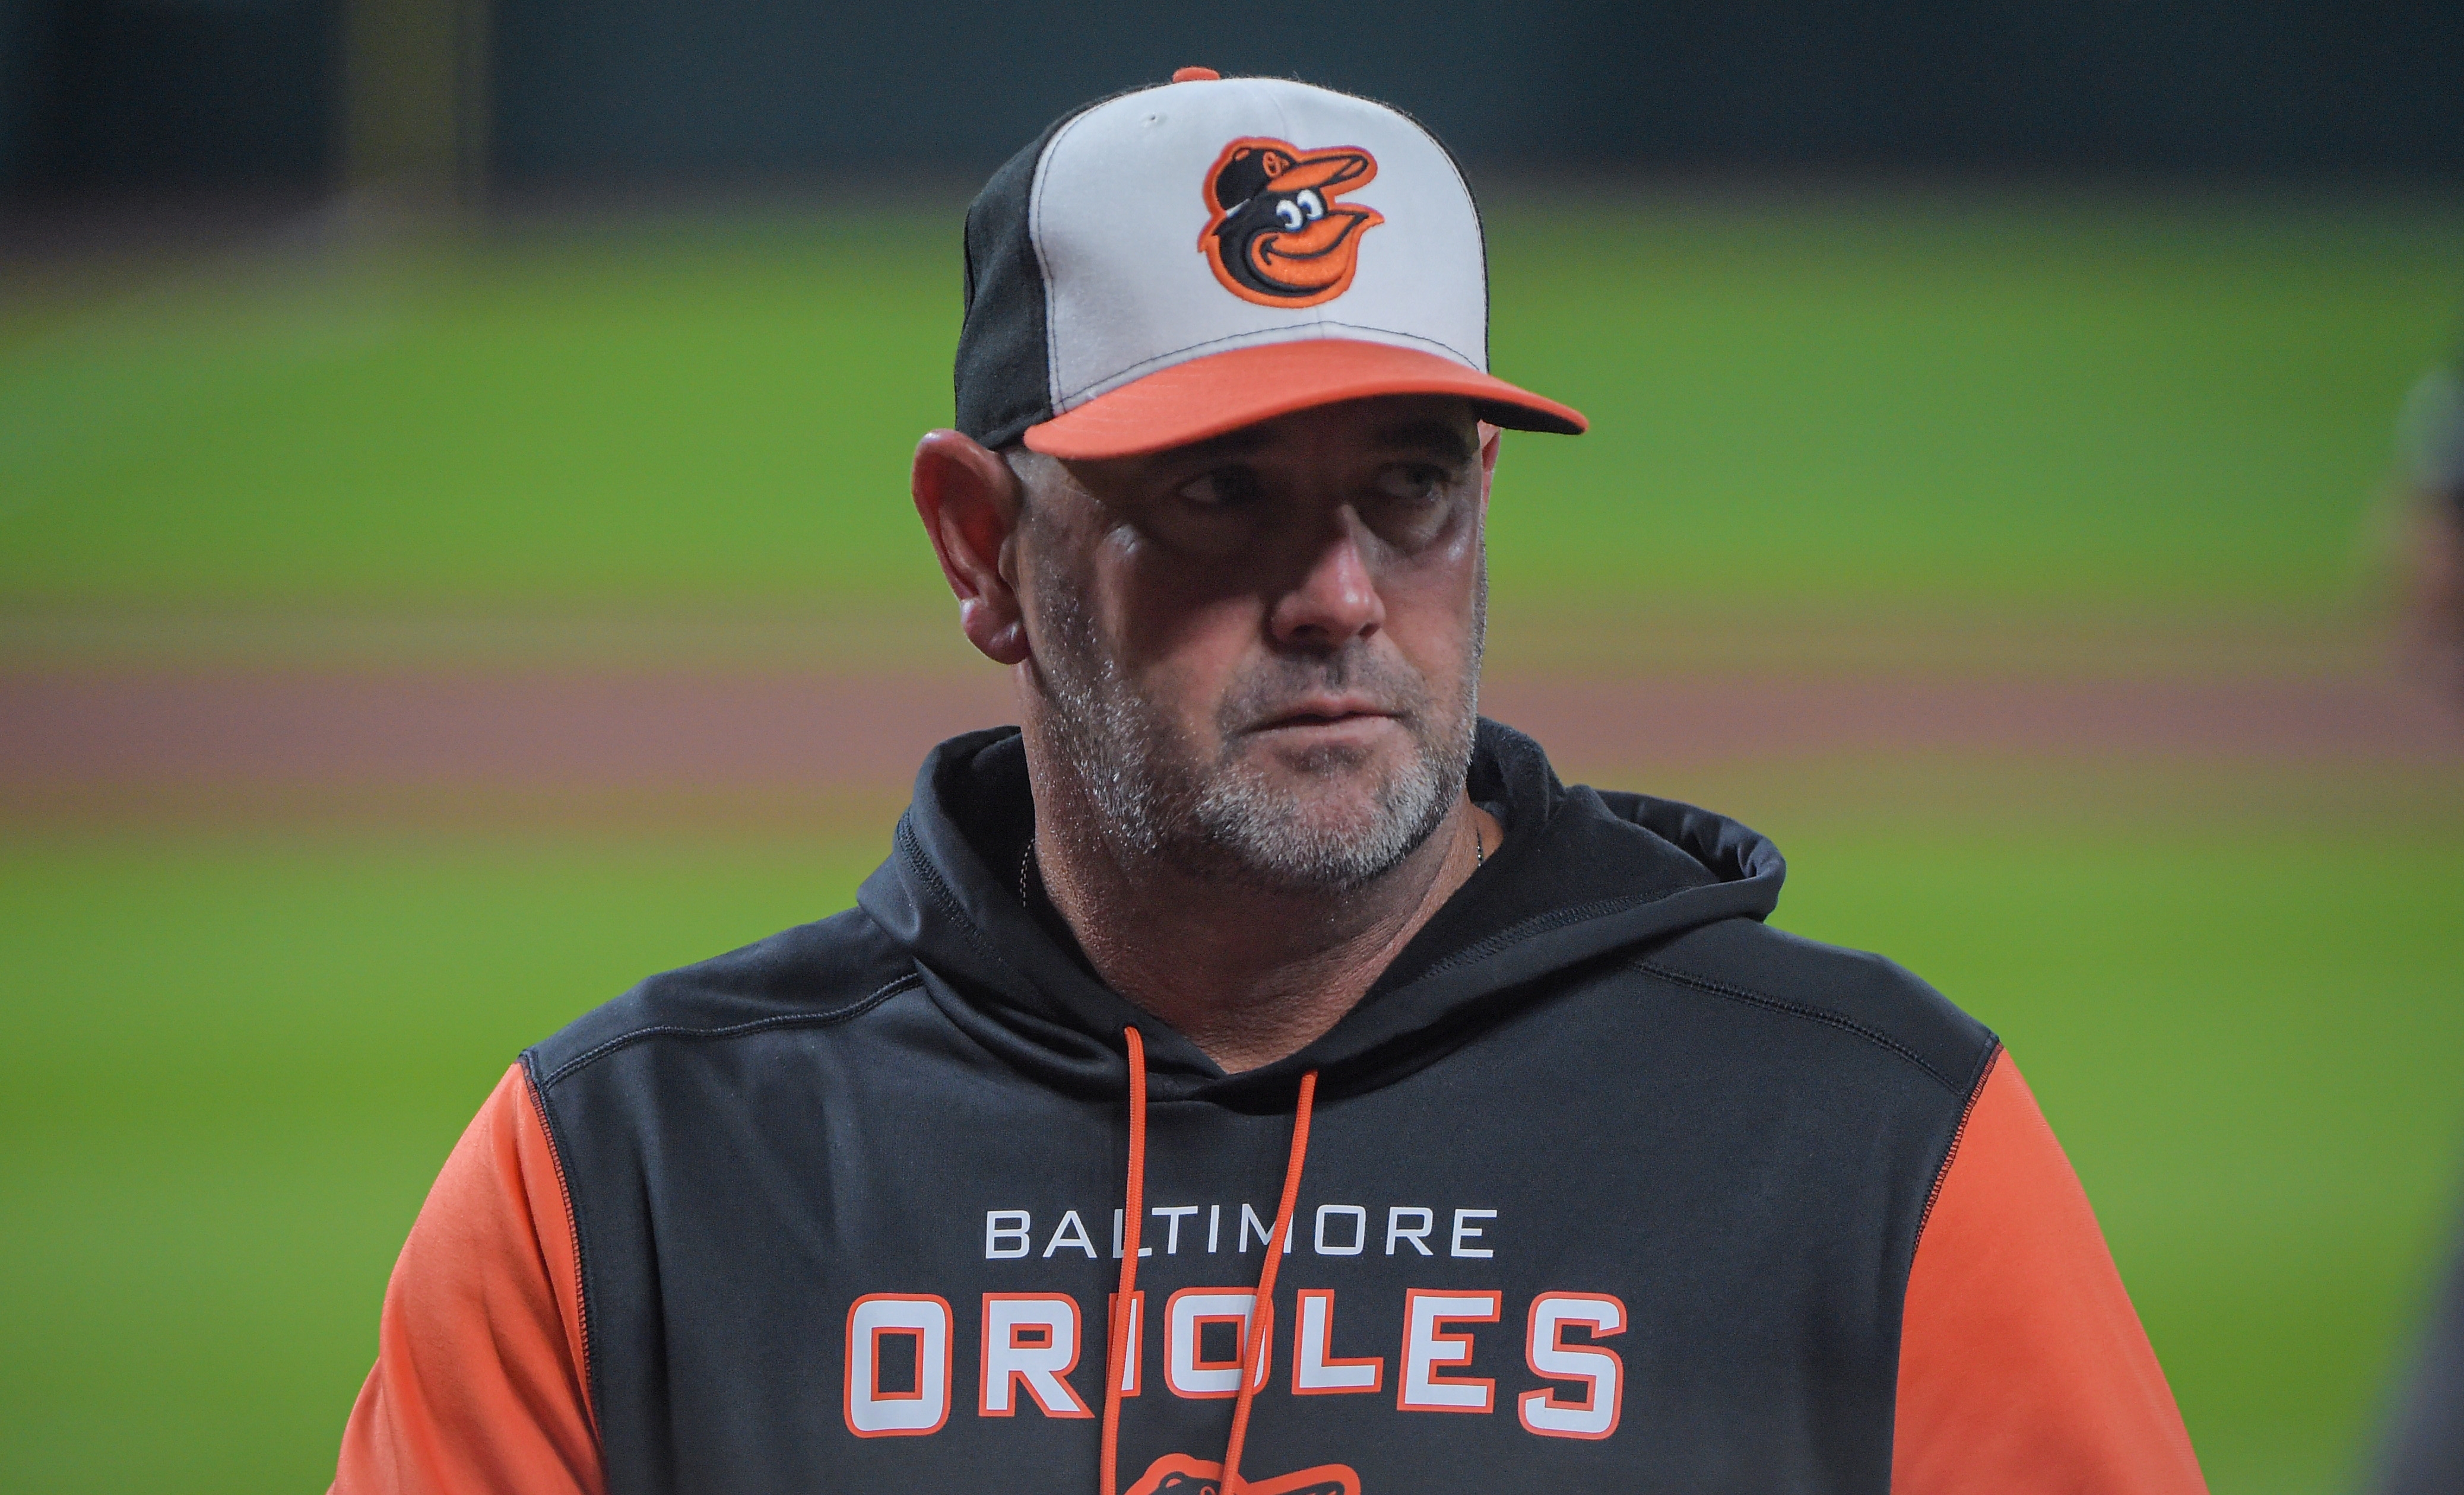 BALTIMORE, MD - August 5: Baltimore Orioles manager Brandon Hyde